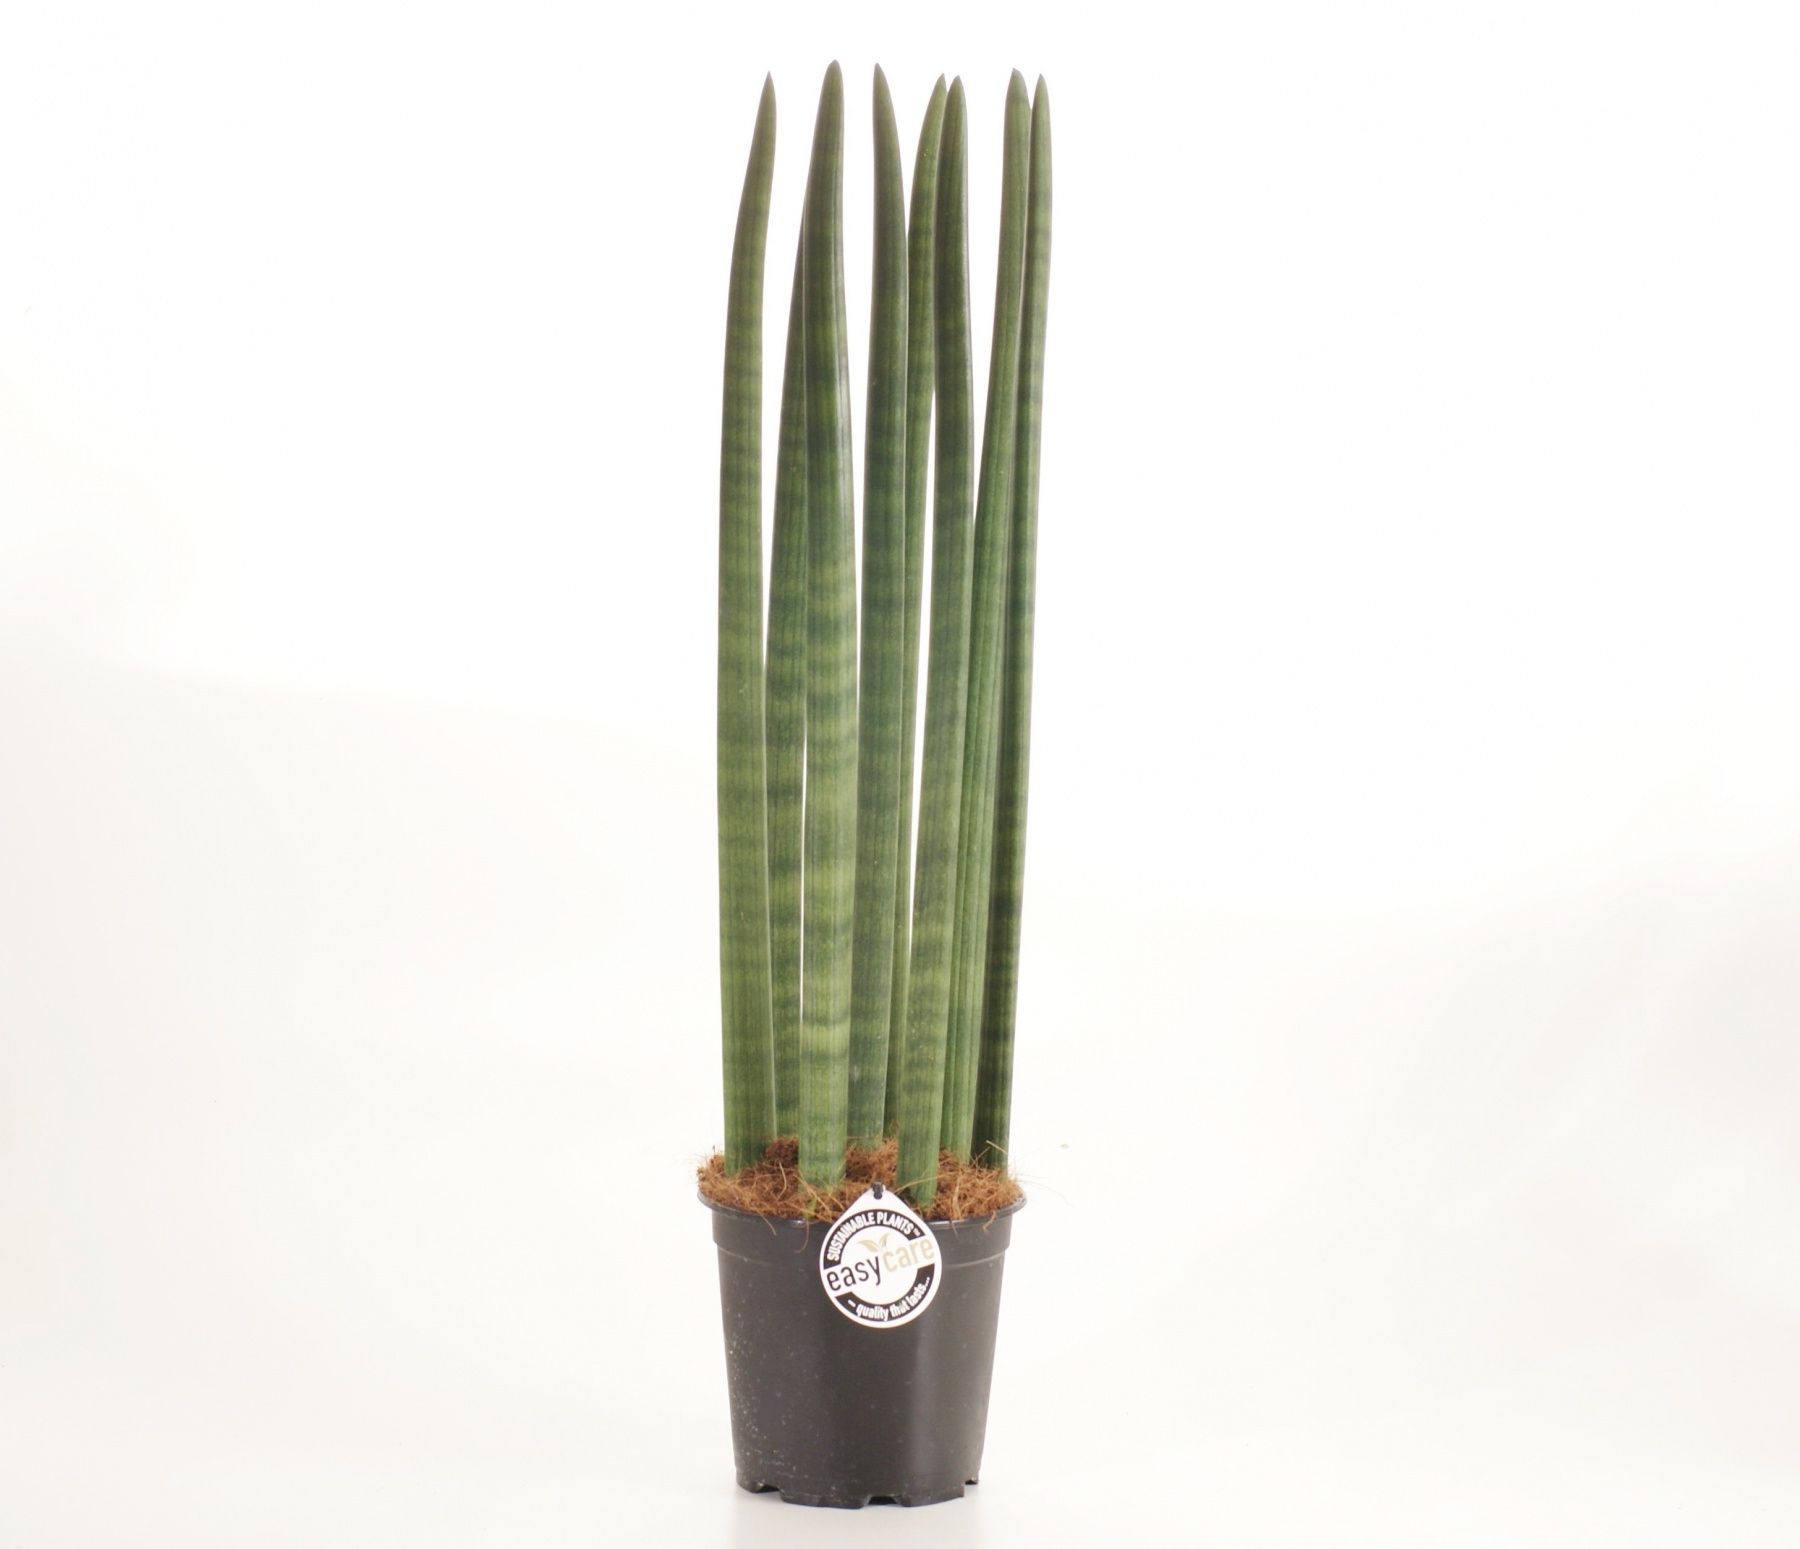 Sansevieria cylindrica 'Straight' - A.k.a. dragon fingers | For the ...